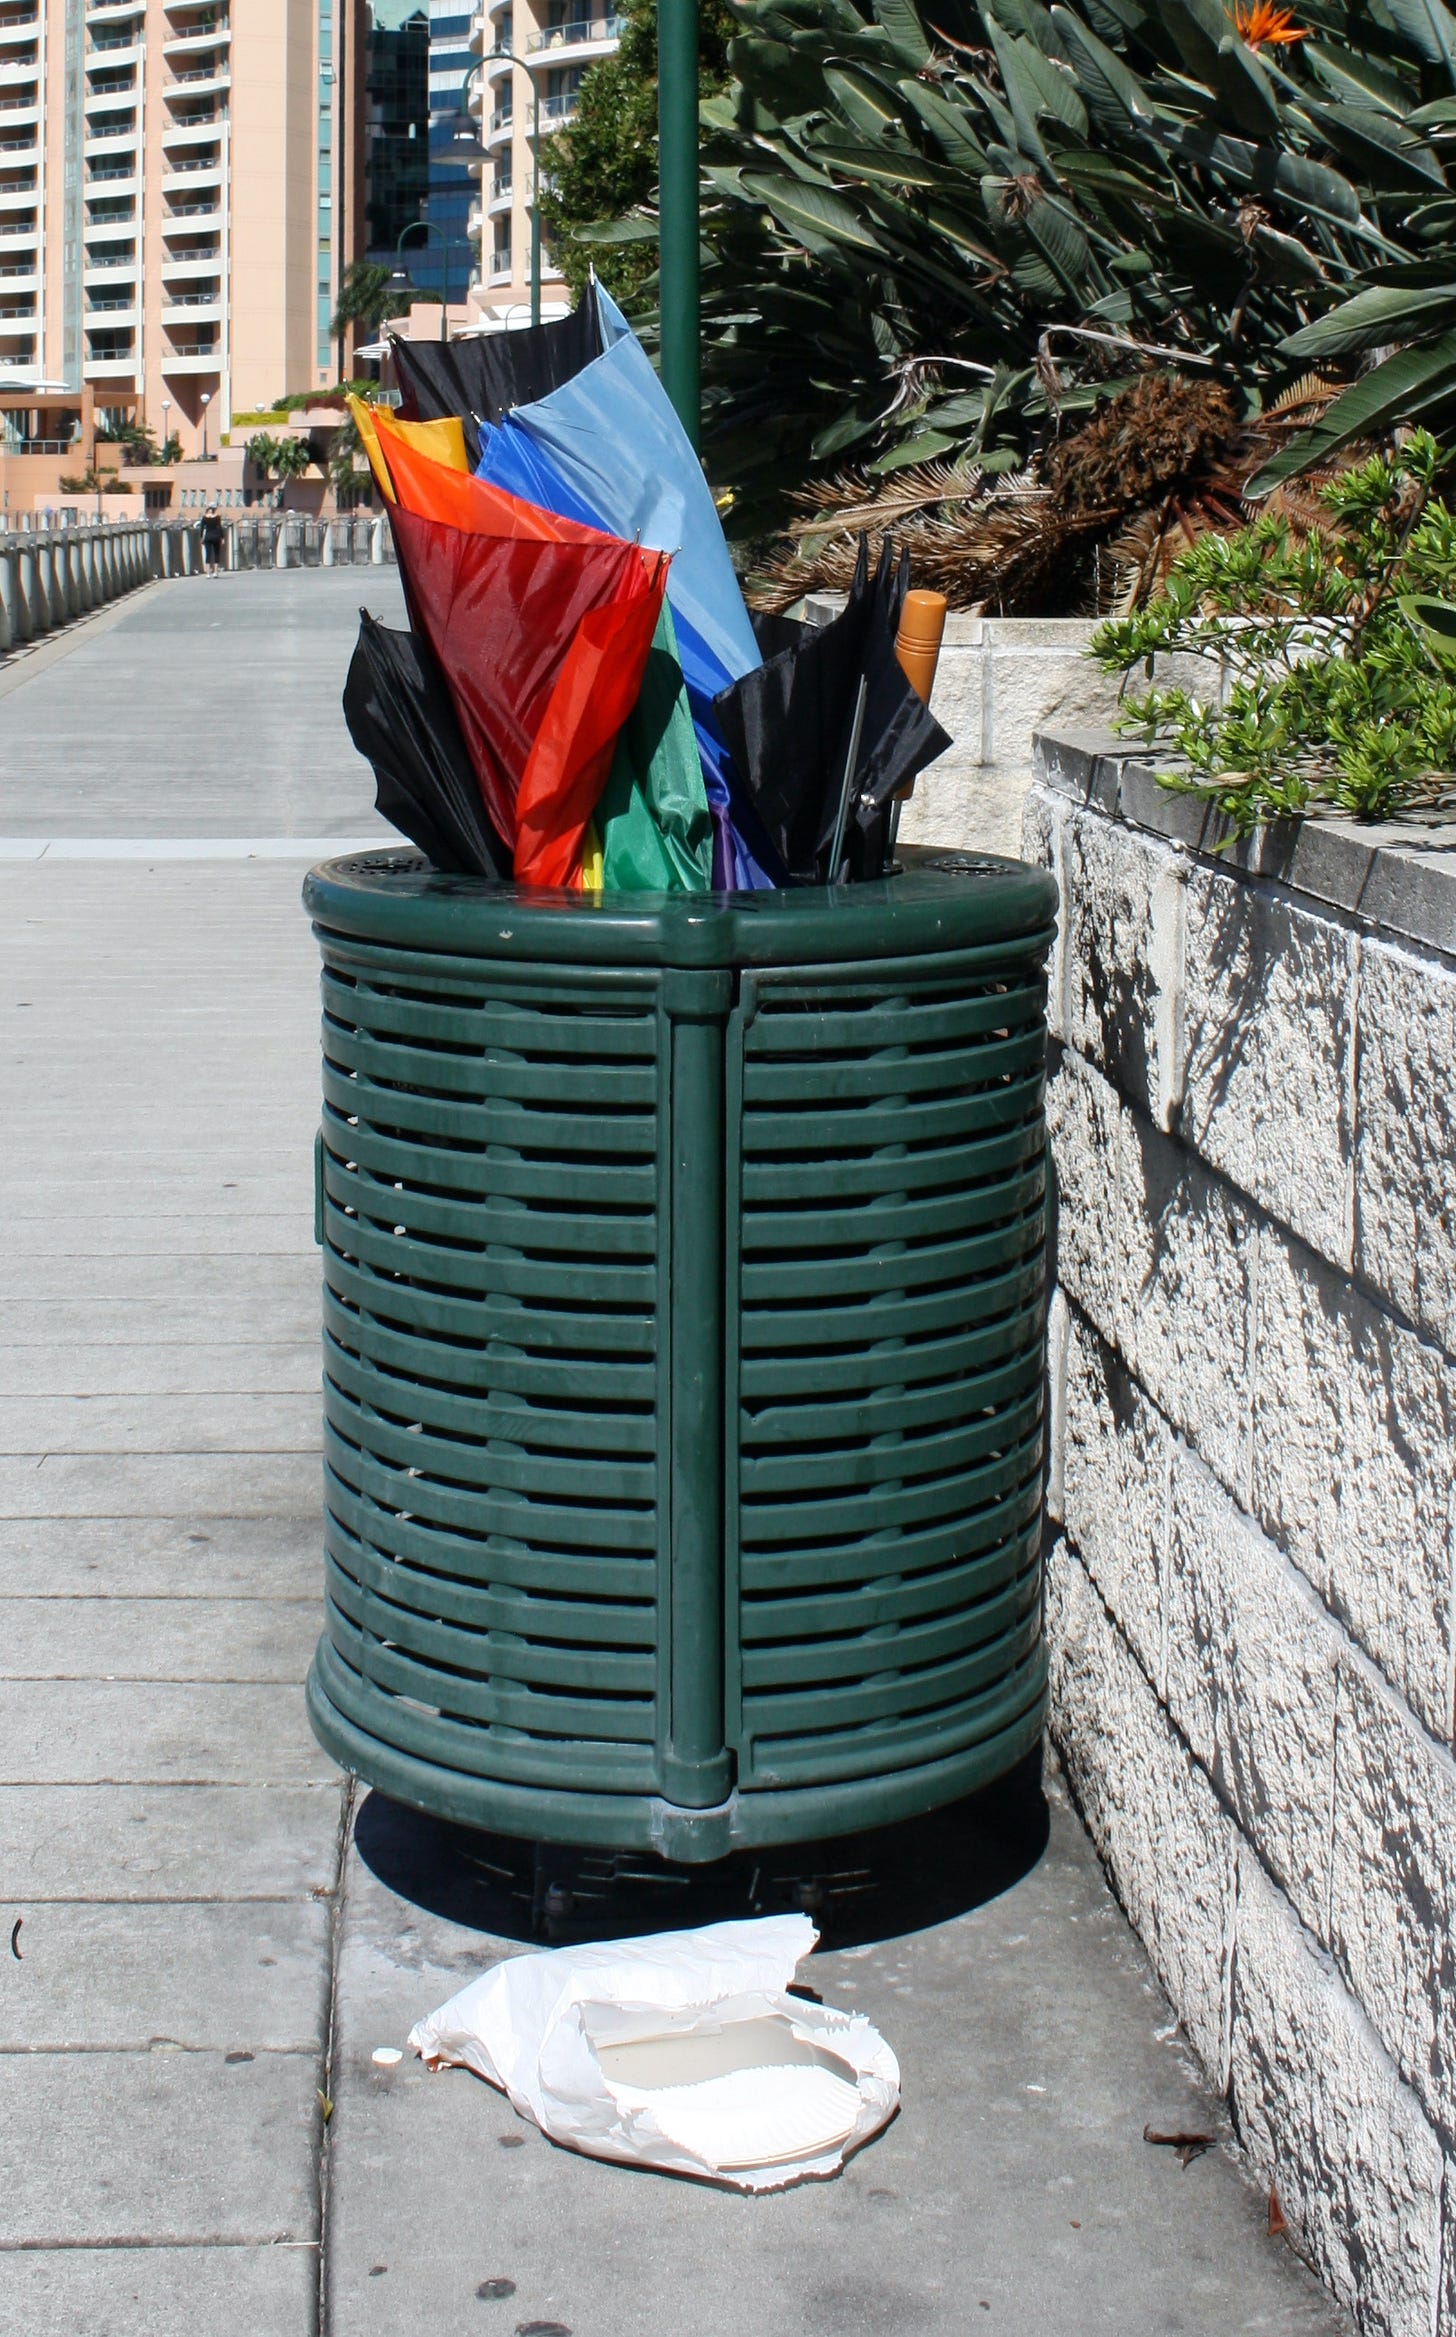 A trash can filled with umbrellas on a sunny day after a storm